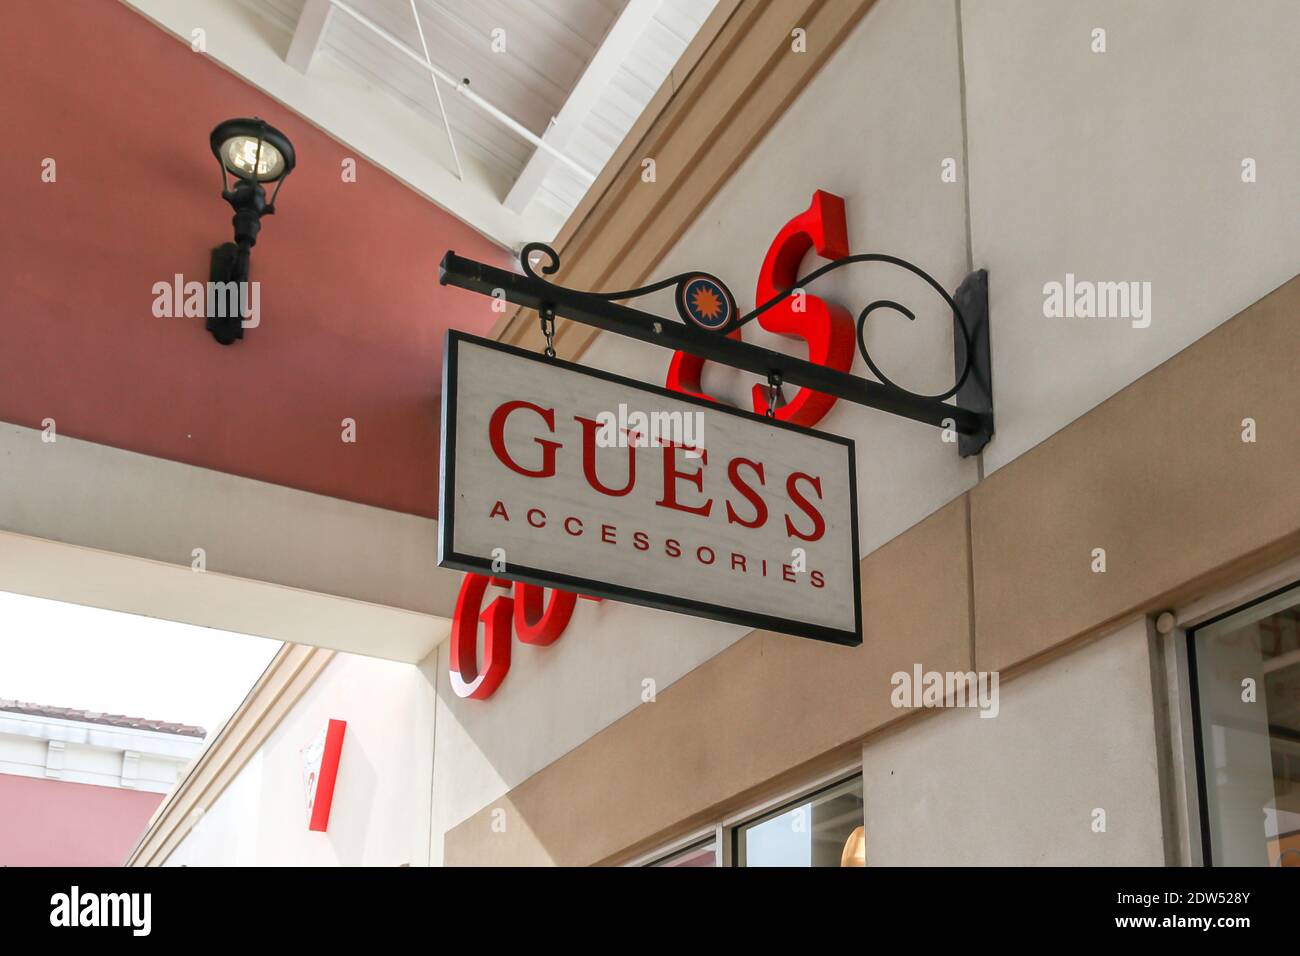 Guess store sign High Resolution Stock Photography and Images - Alamy